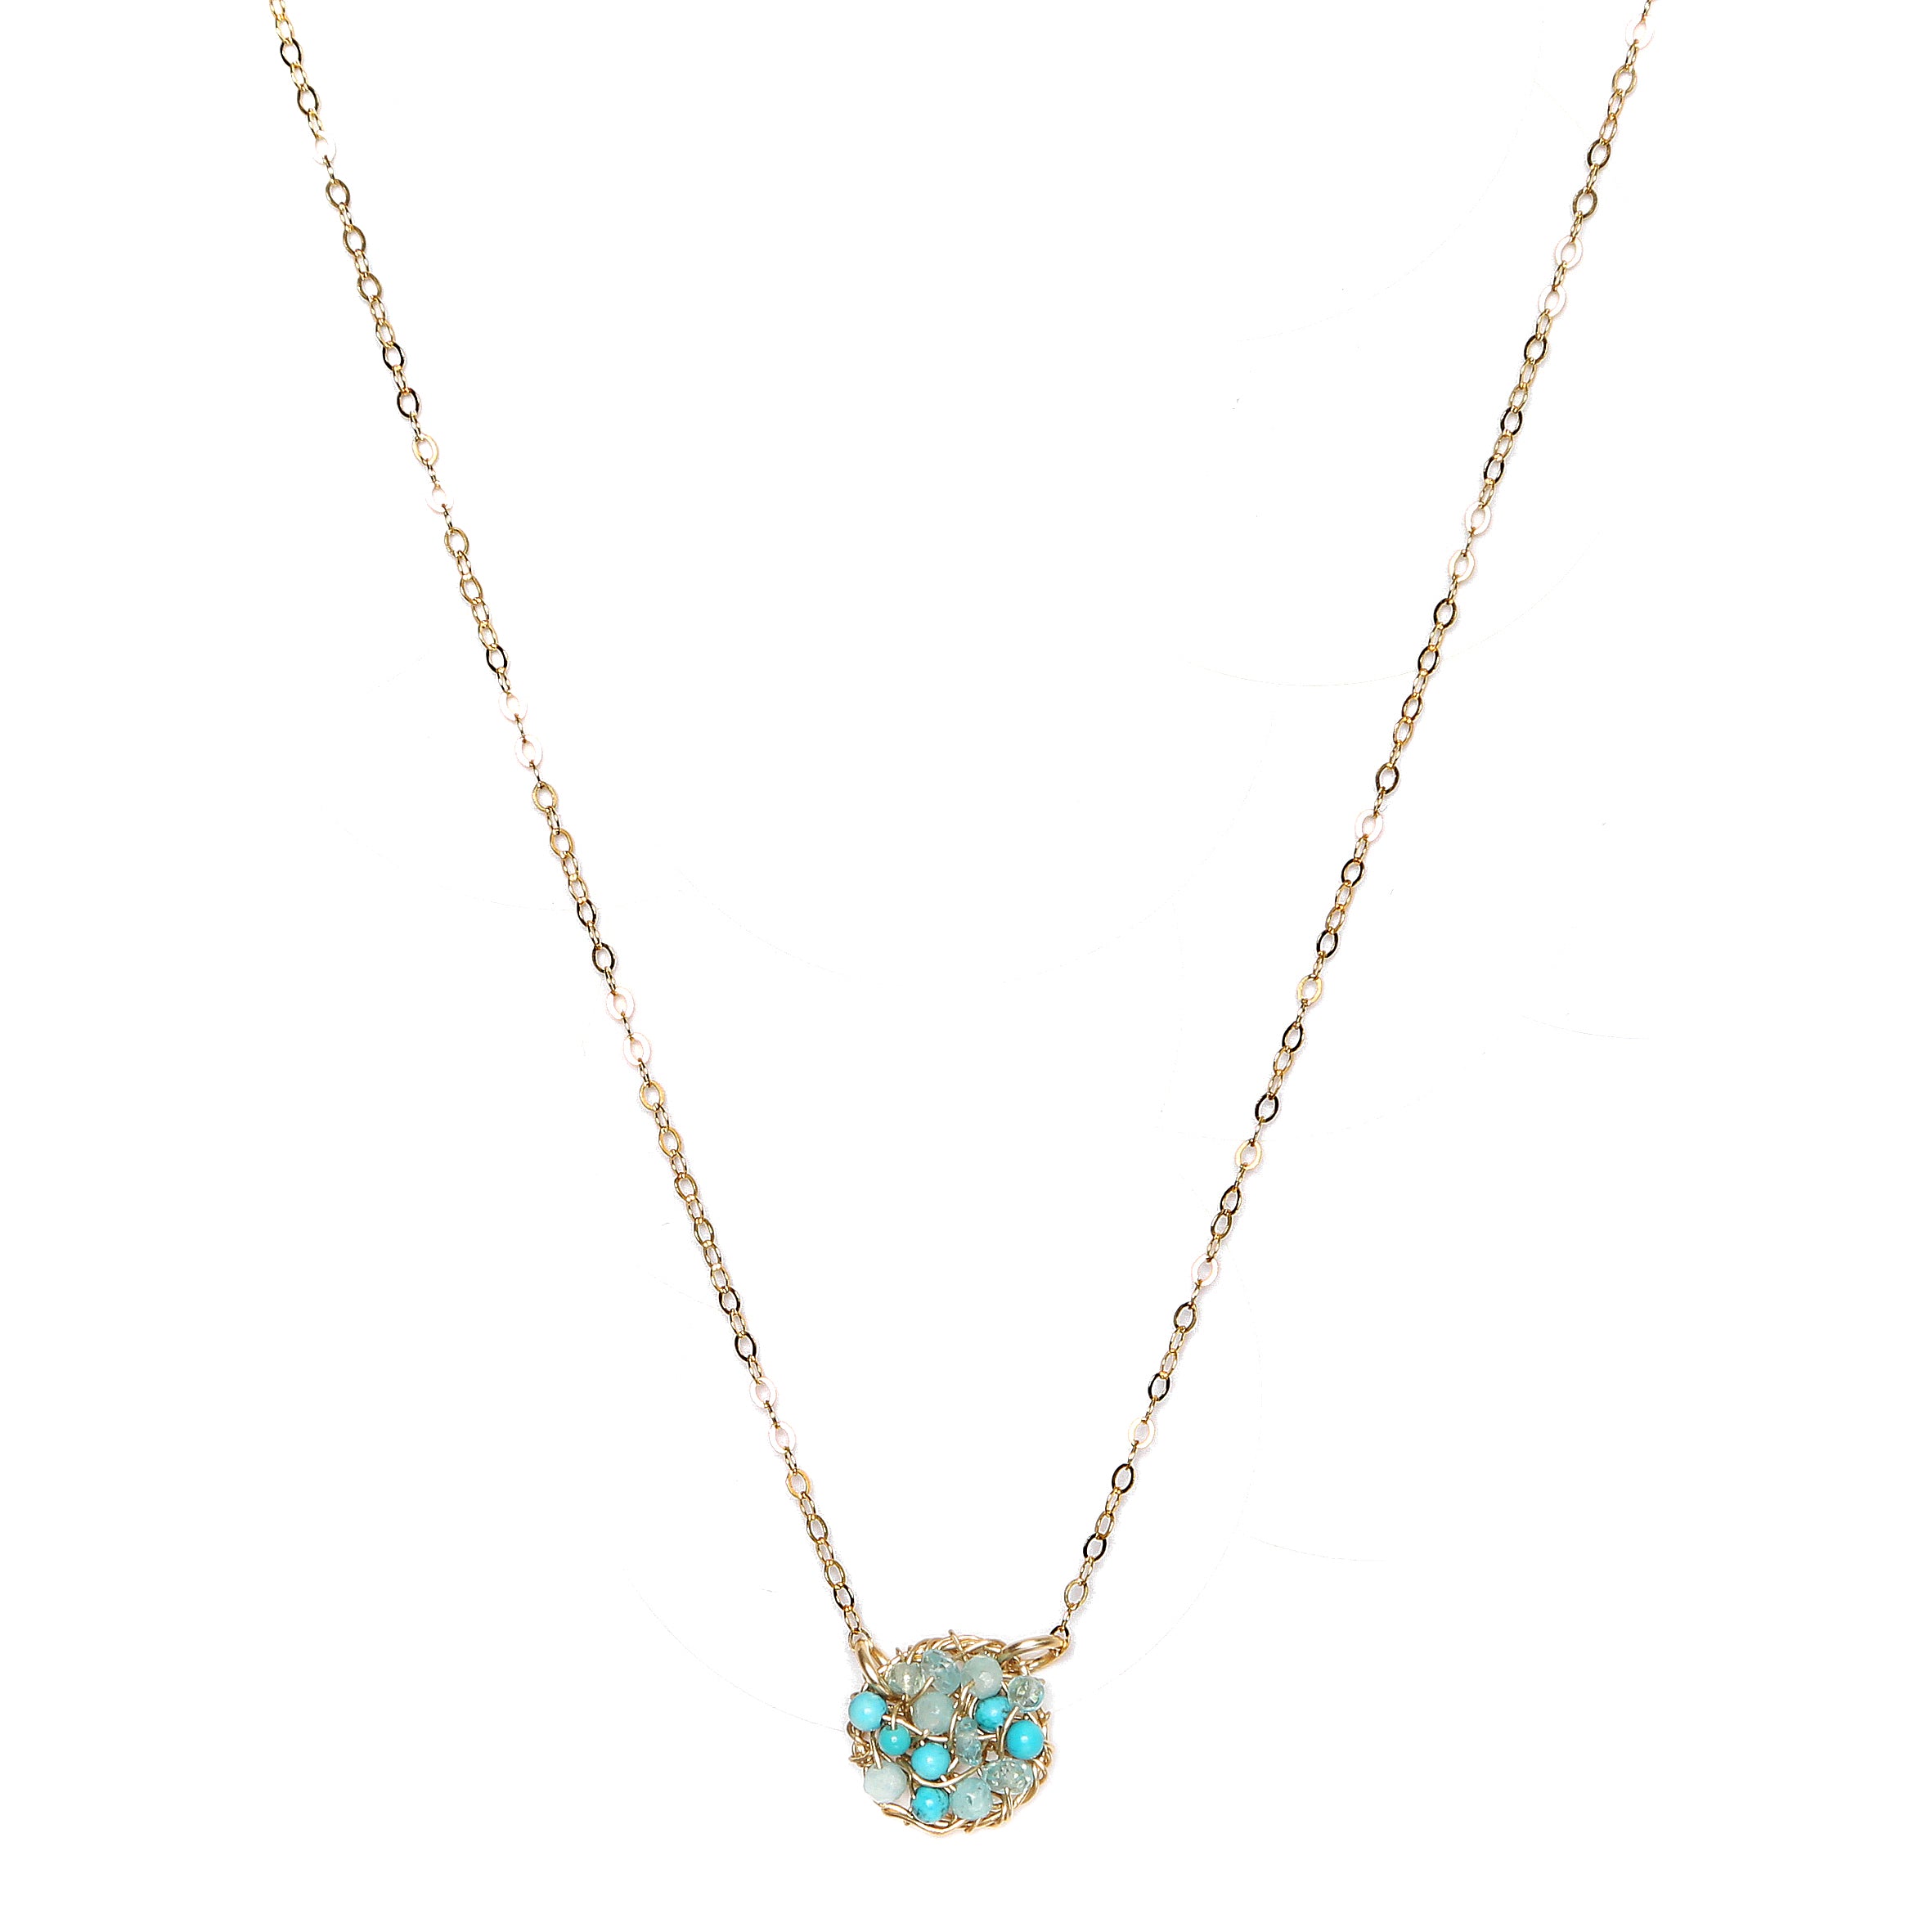 Aura Necklace #2 (10mm) - Turquoise Mix Gems Necklaces TARBAY   